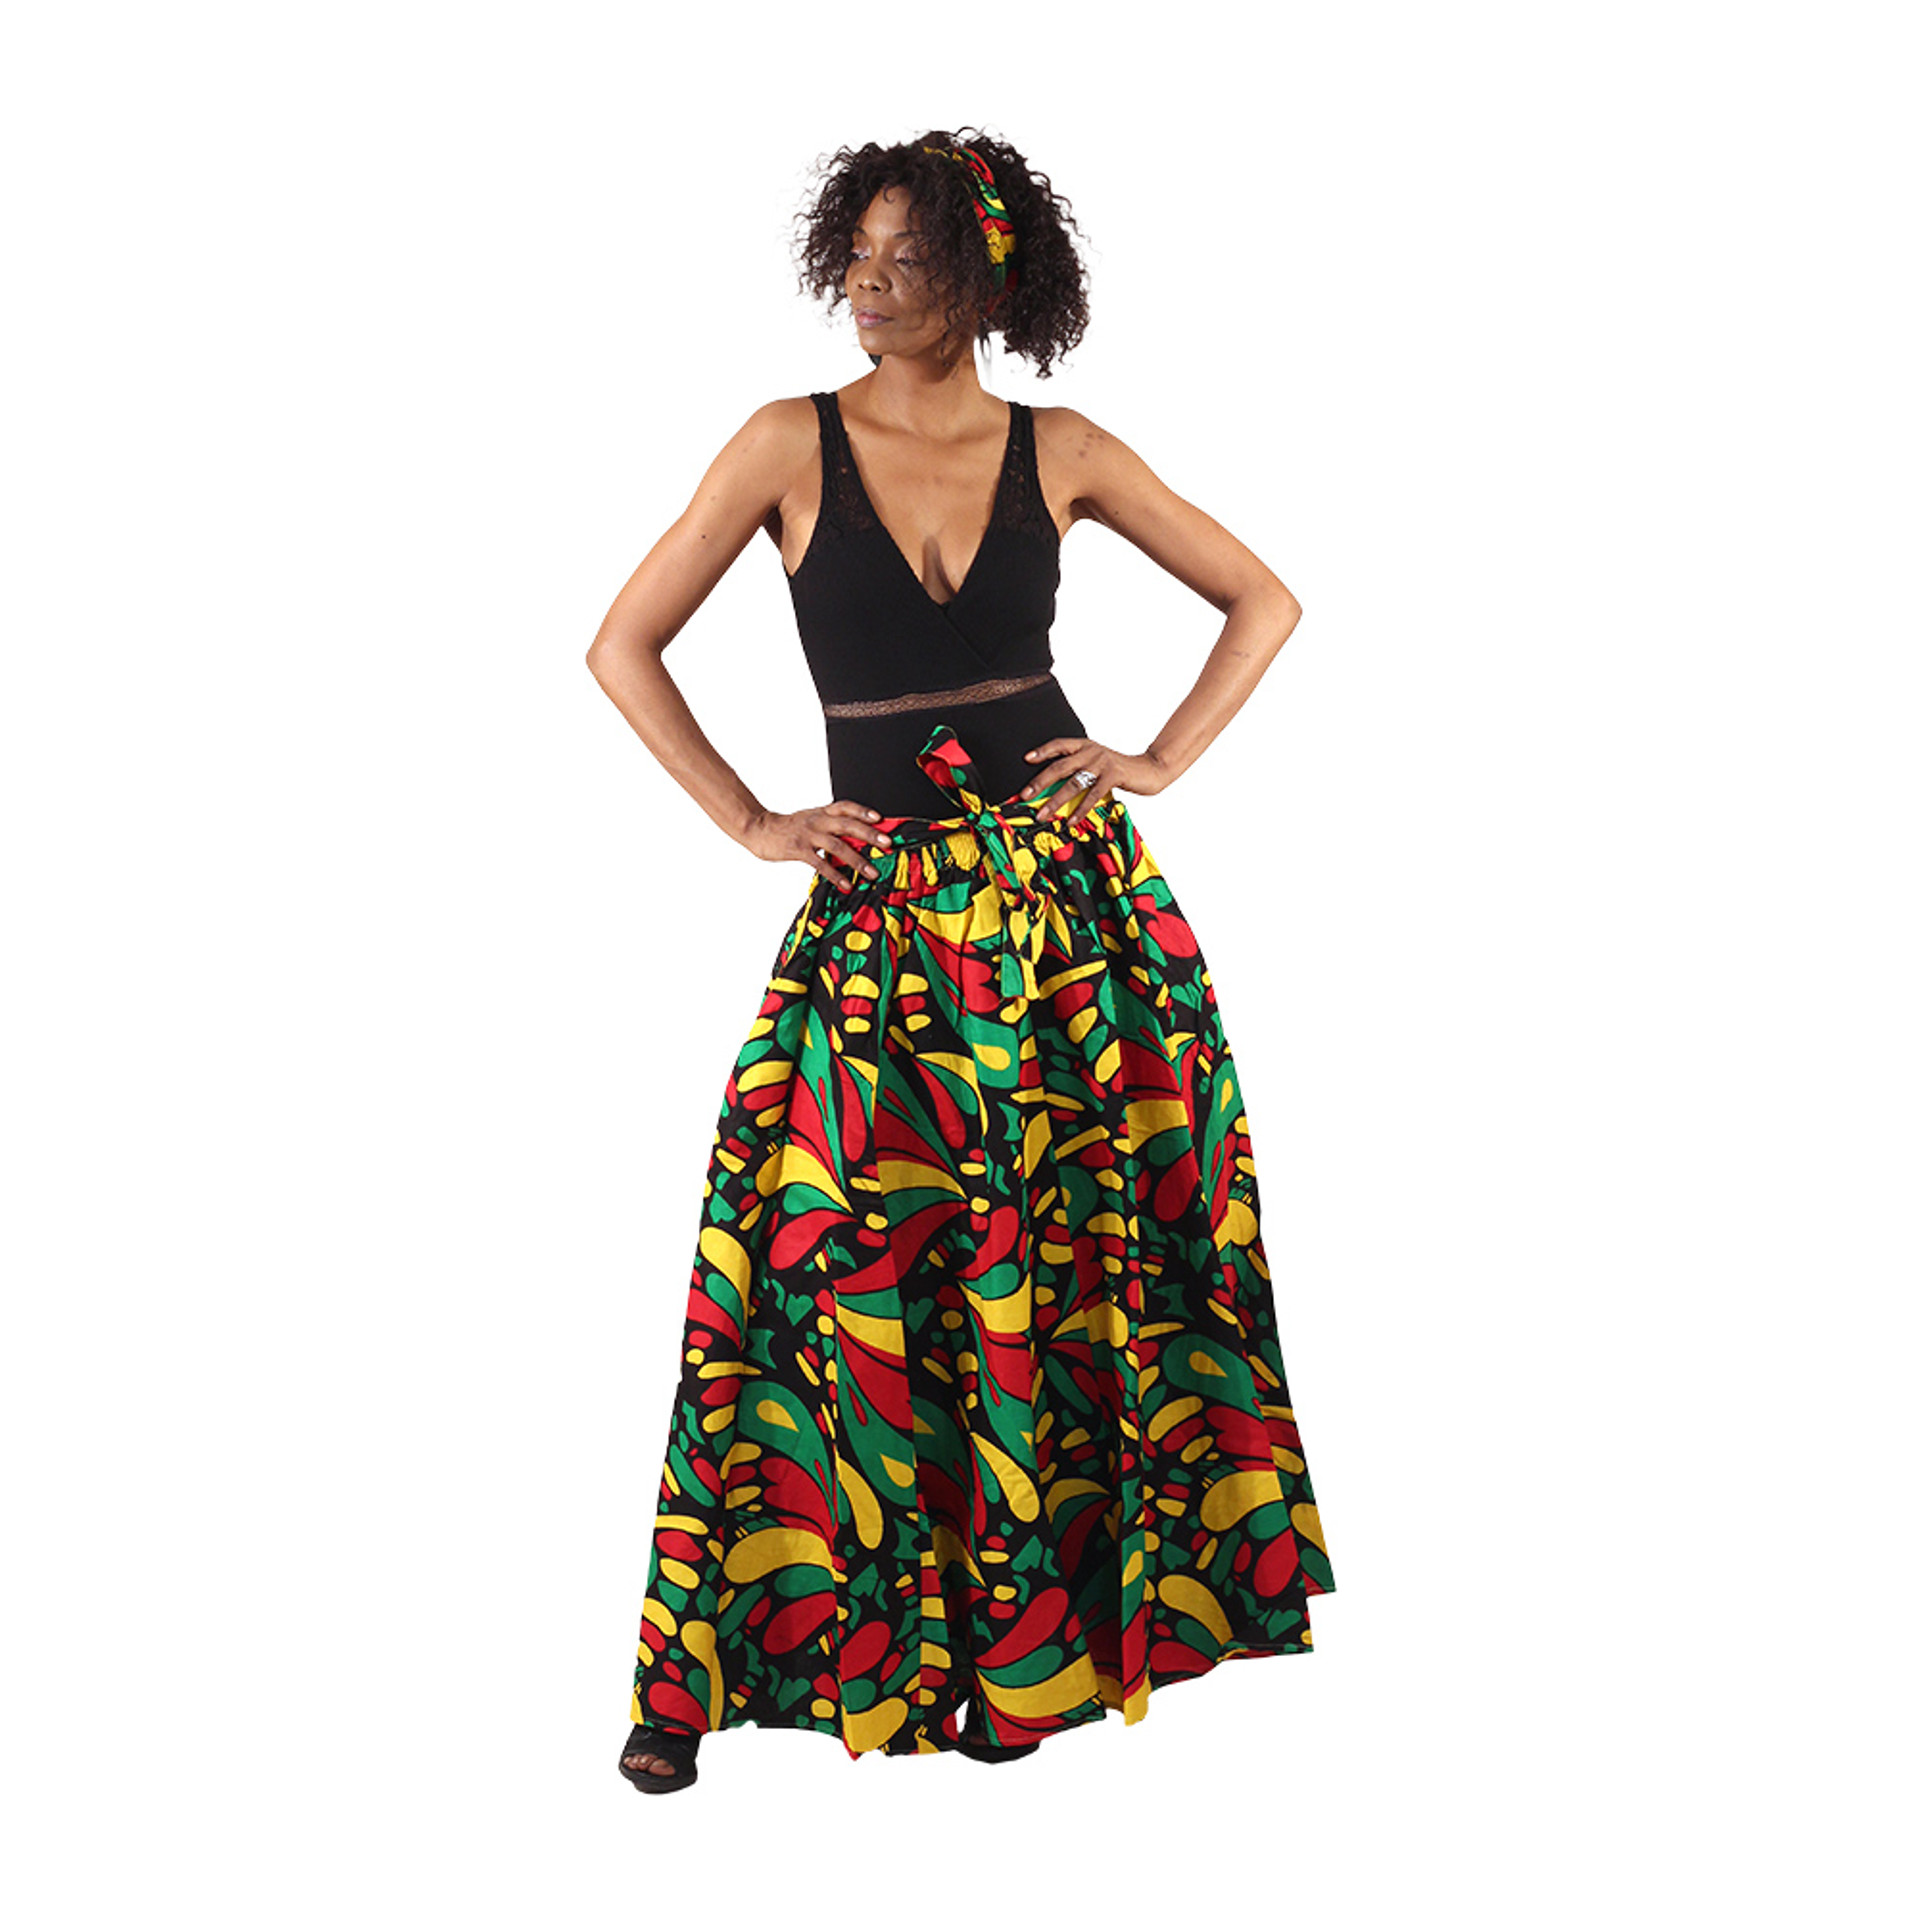 New Wholesale African Clothing - Men & Women | Africa Imports